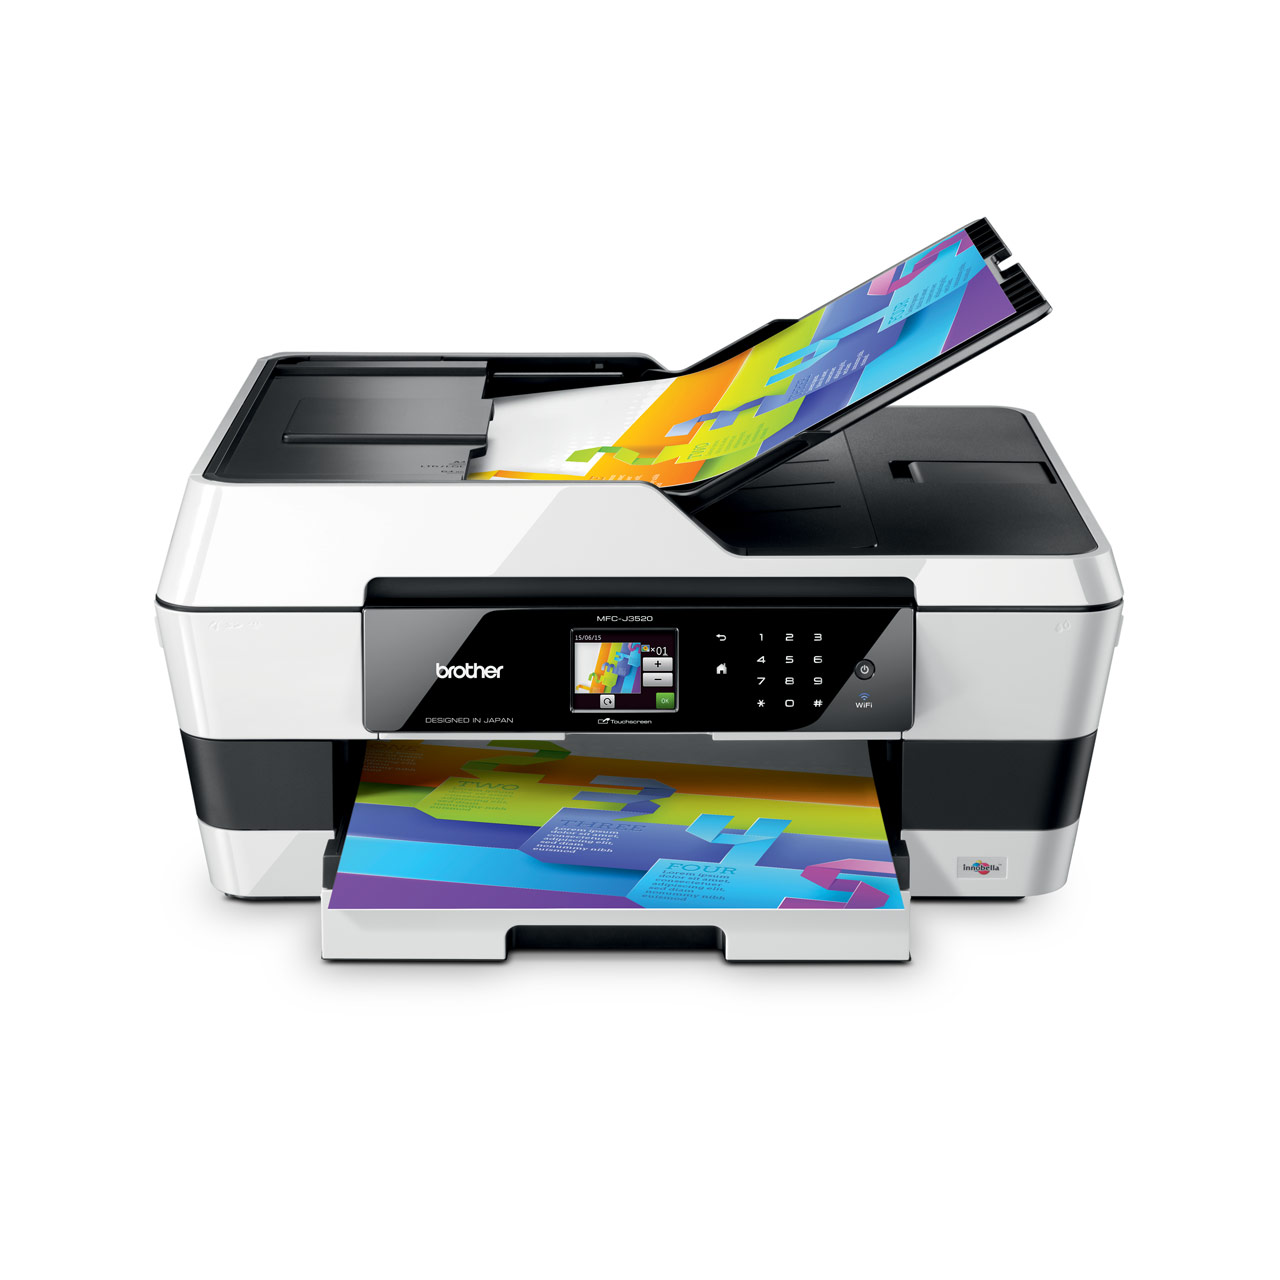 Brother MFC-J3520 Color WiFi Multifunction Ink Benefit Printer/ A3 print/ scan/direct photo print/double-sided print, wired/wireless networking/Fast print speeds up to 35